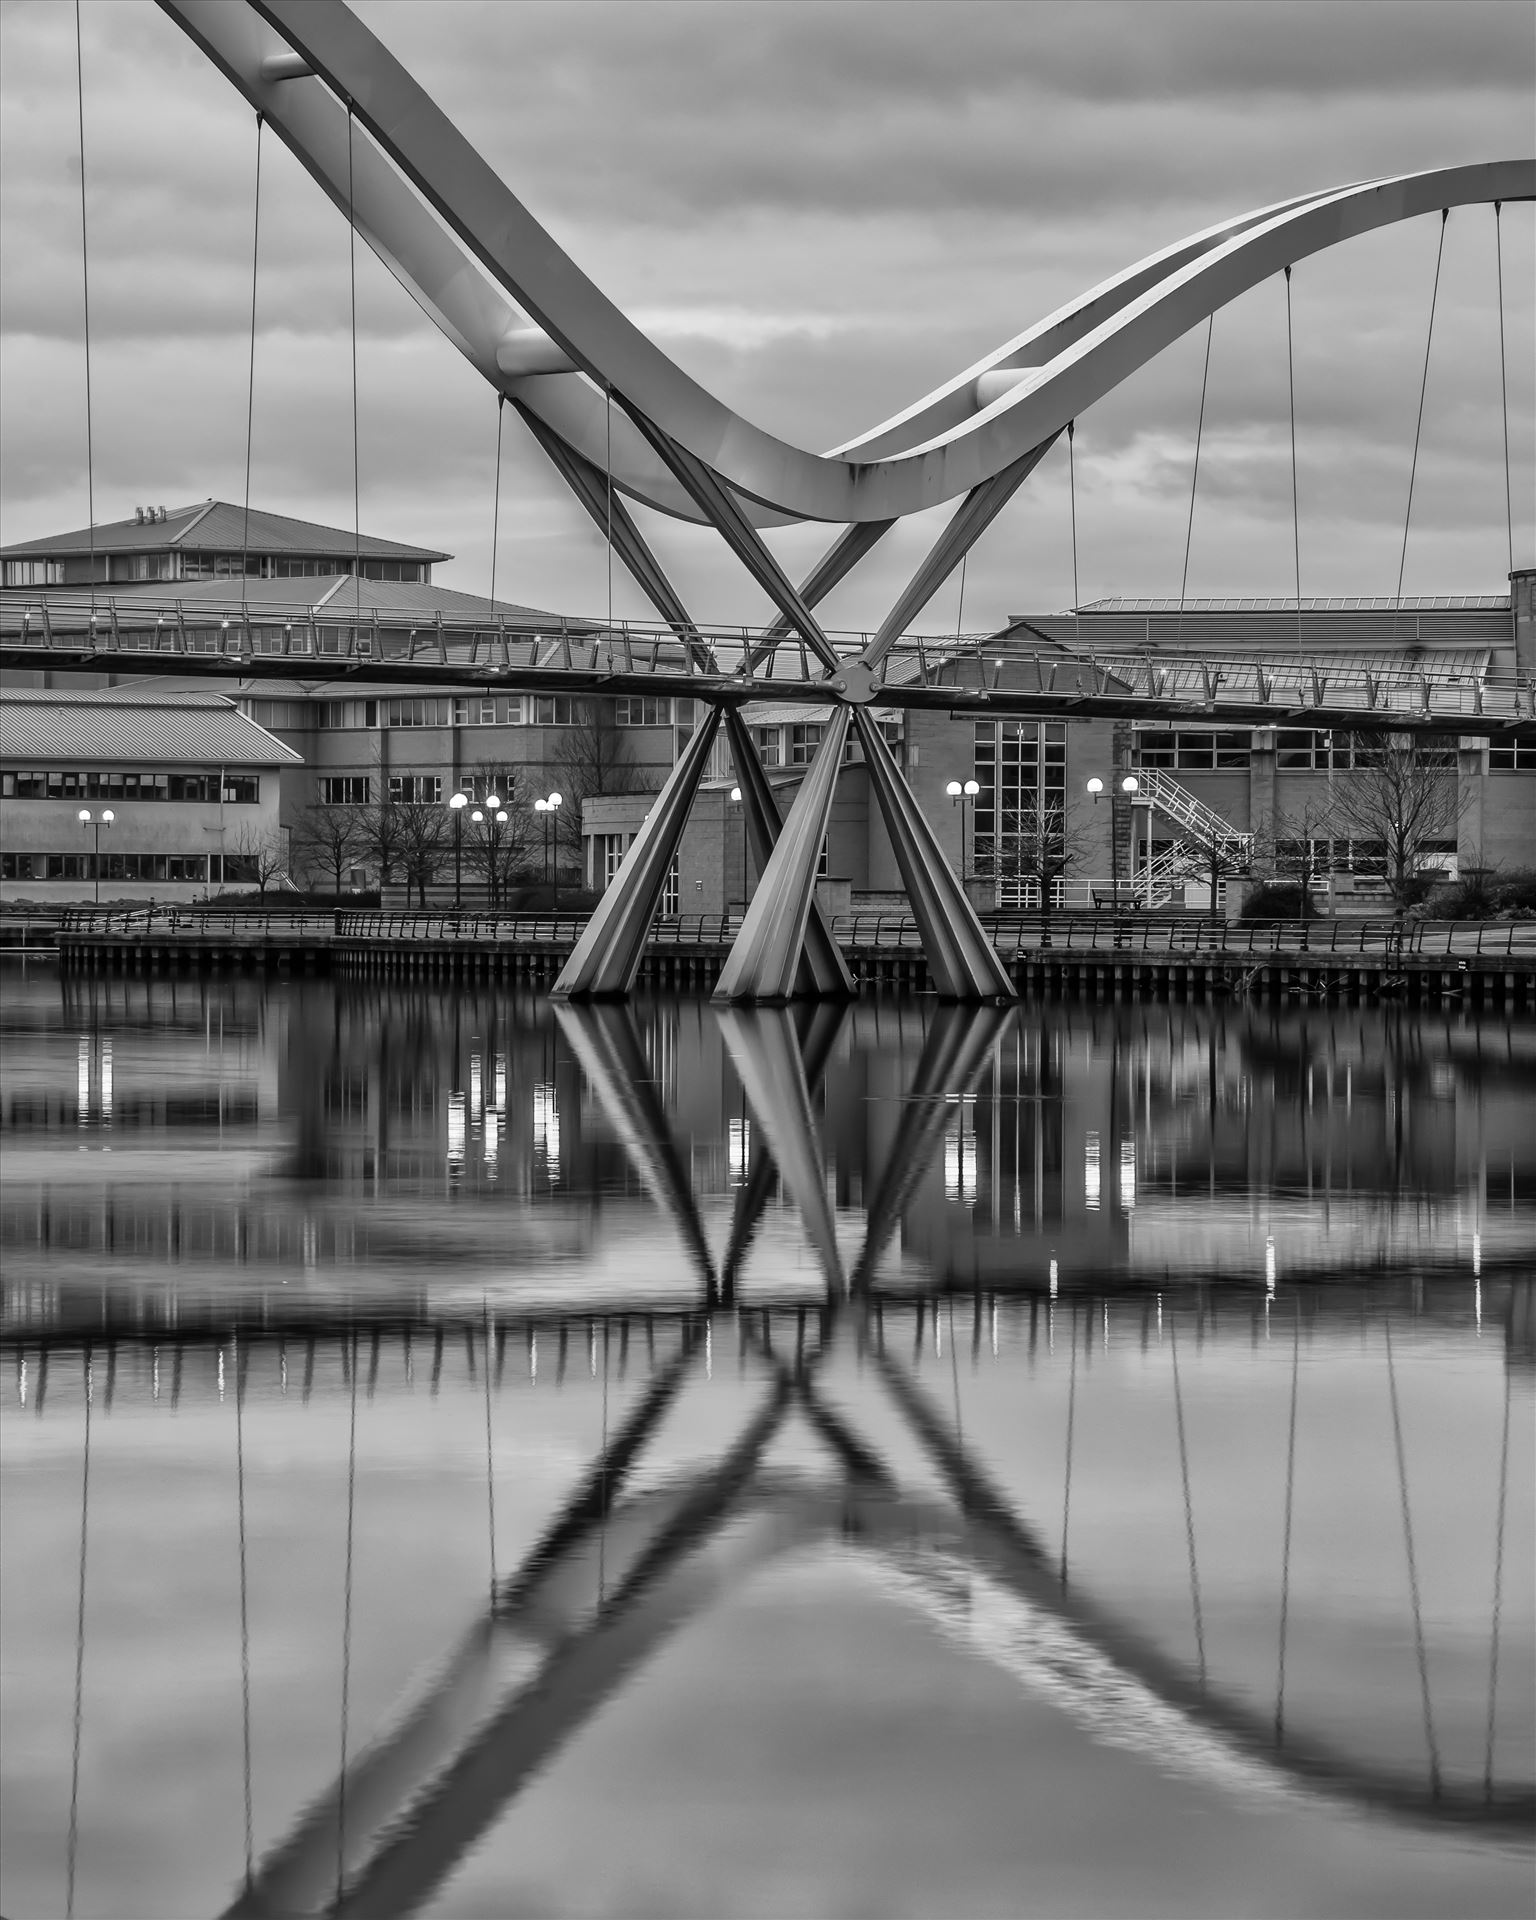 The Infinity Bridge 02 The Infinity Bridge is a public pedestrian and cycle footbridge across the River Tees that was officially opened on 14 May 2009 at a cost of £15 million. by philreay